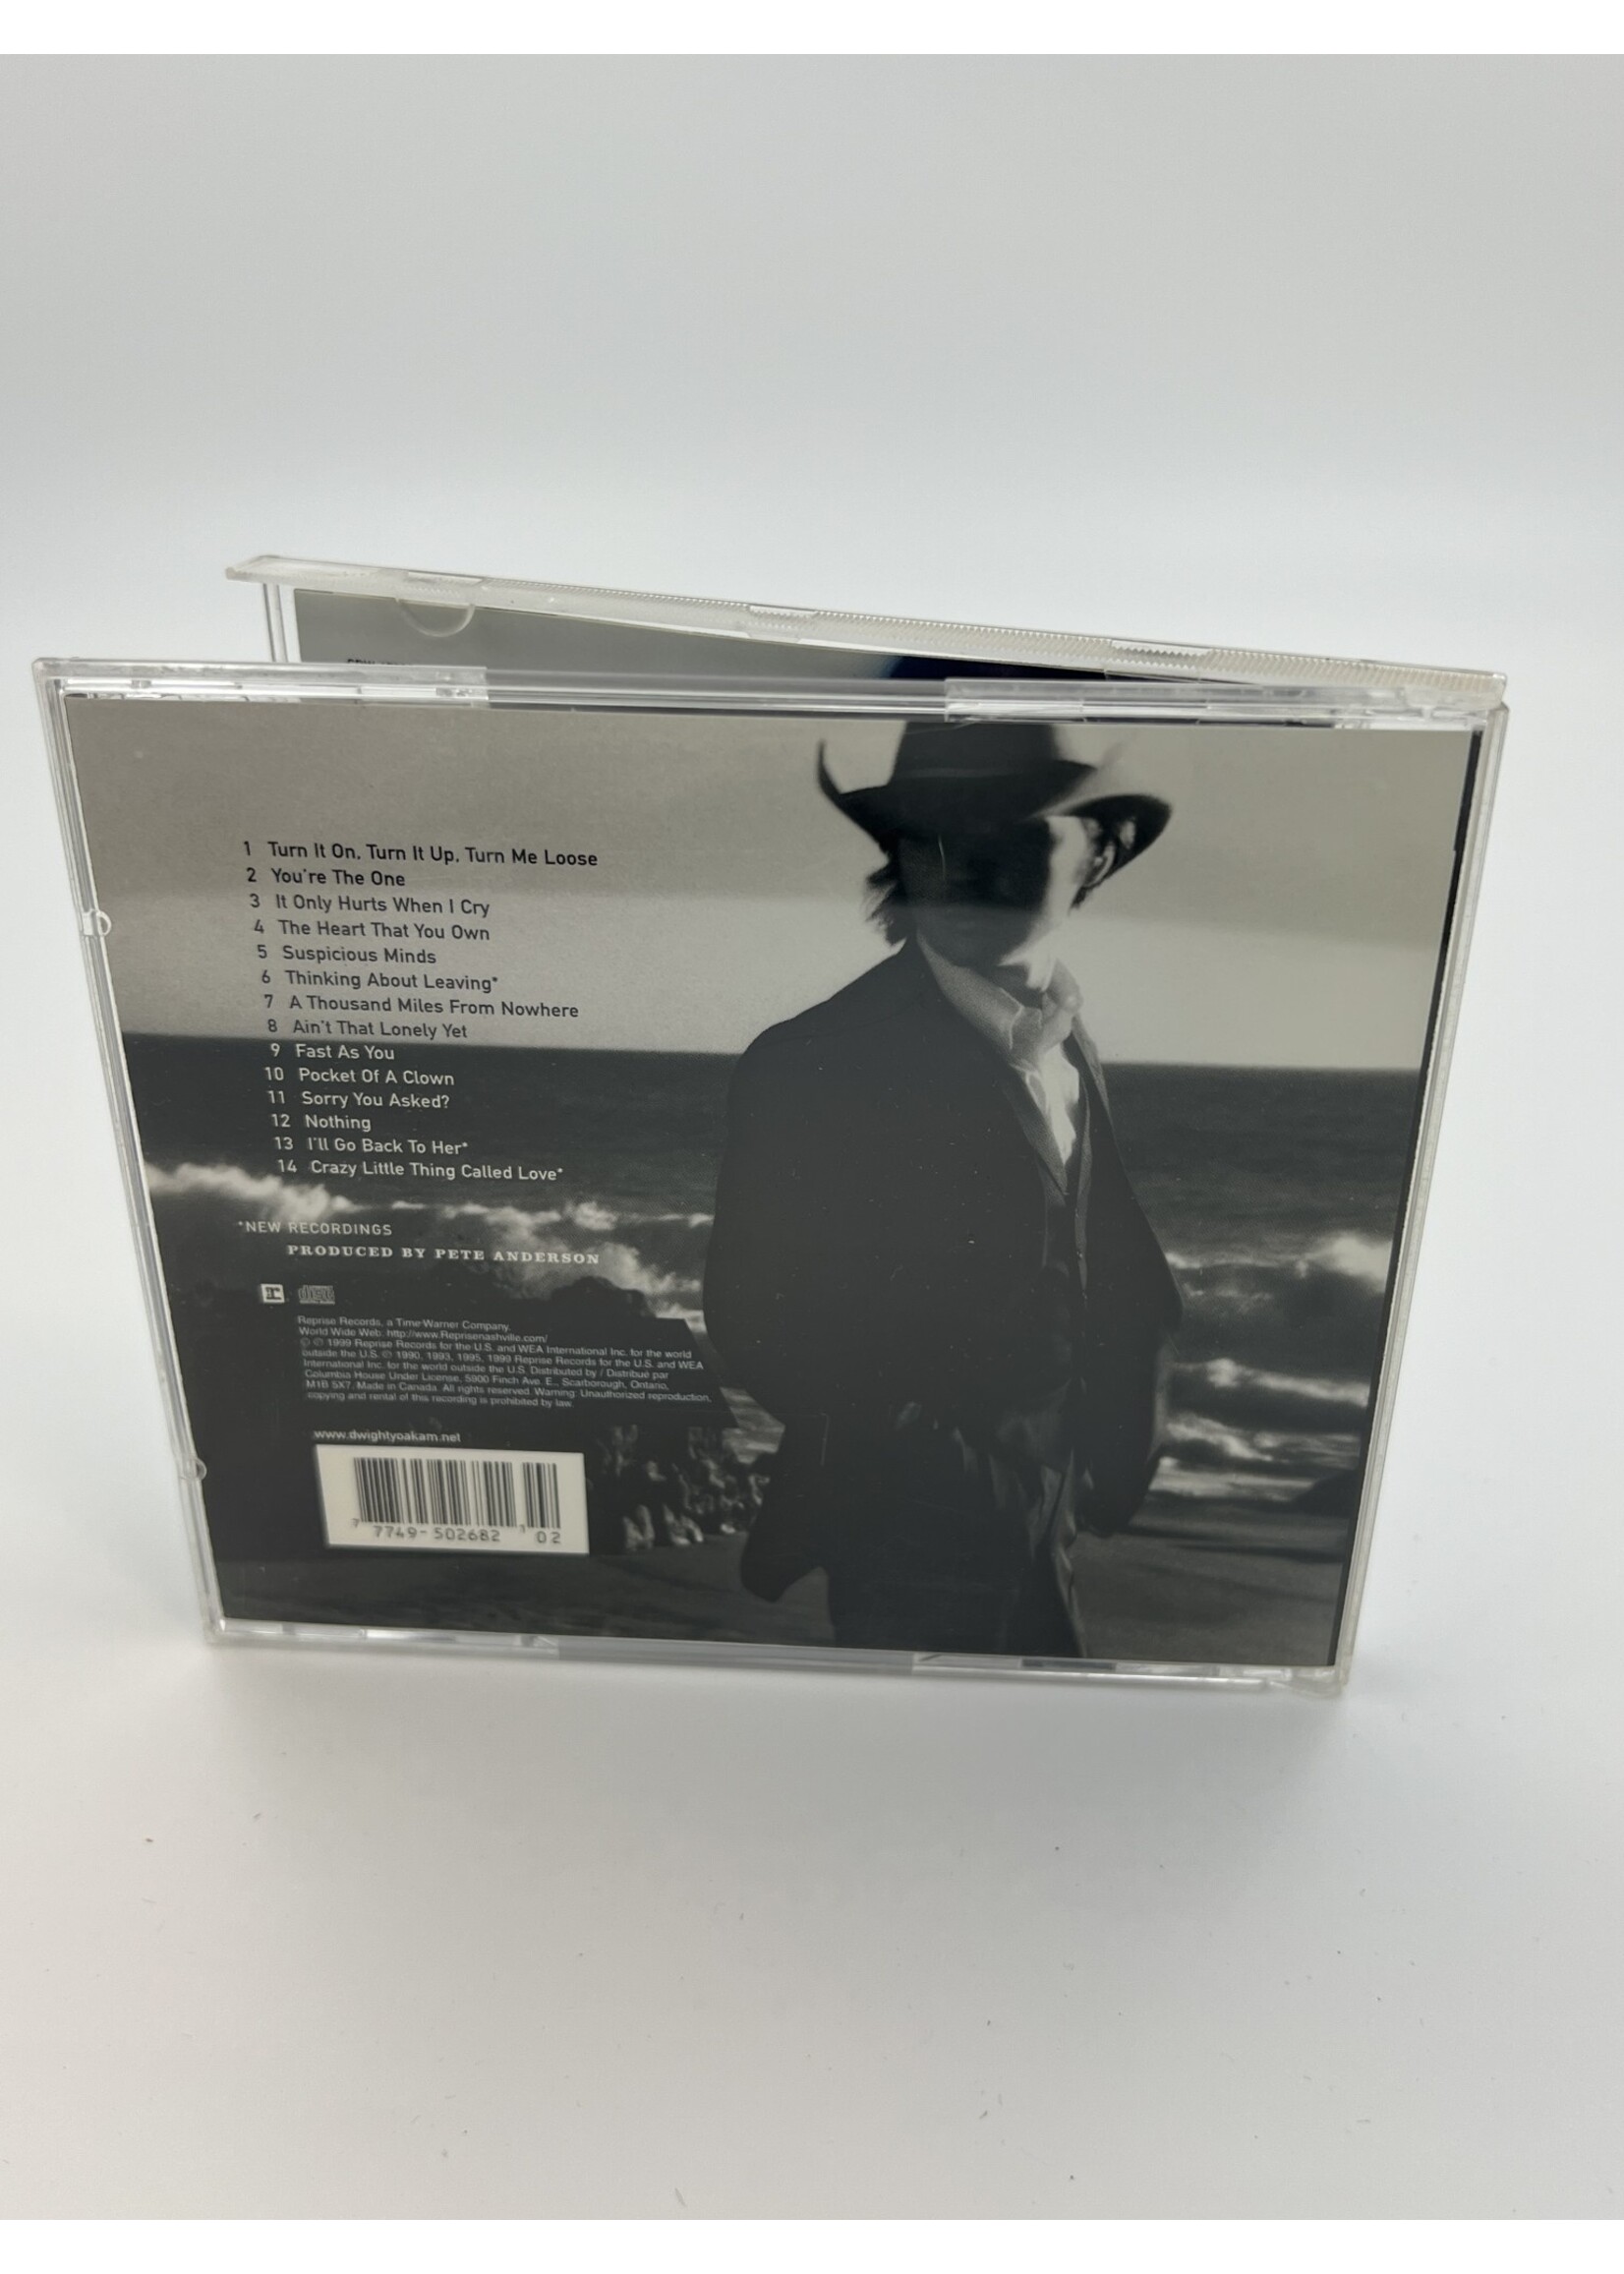 CD Last Chance For A Thousand Years Dwight Yoakams Greatest Hits From The 90s CD